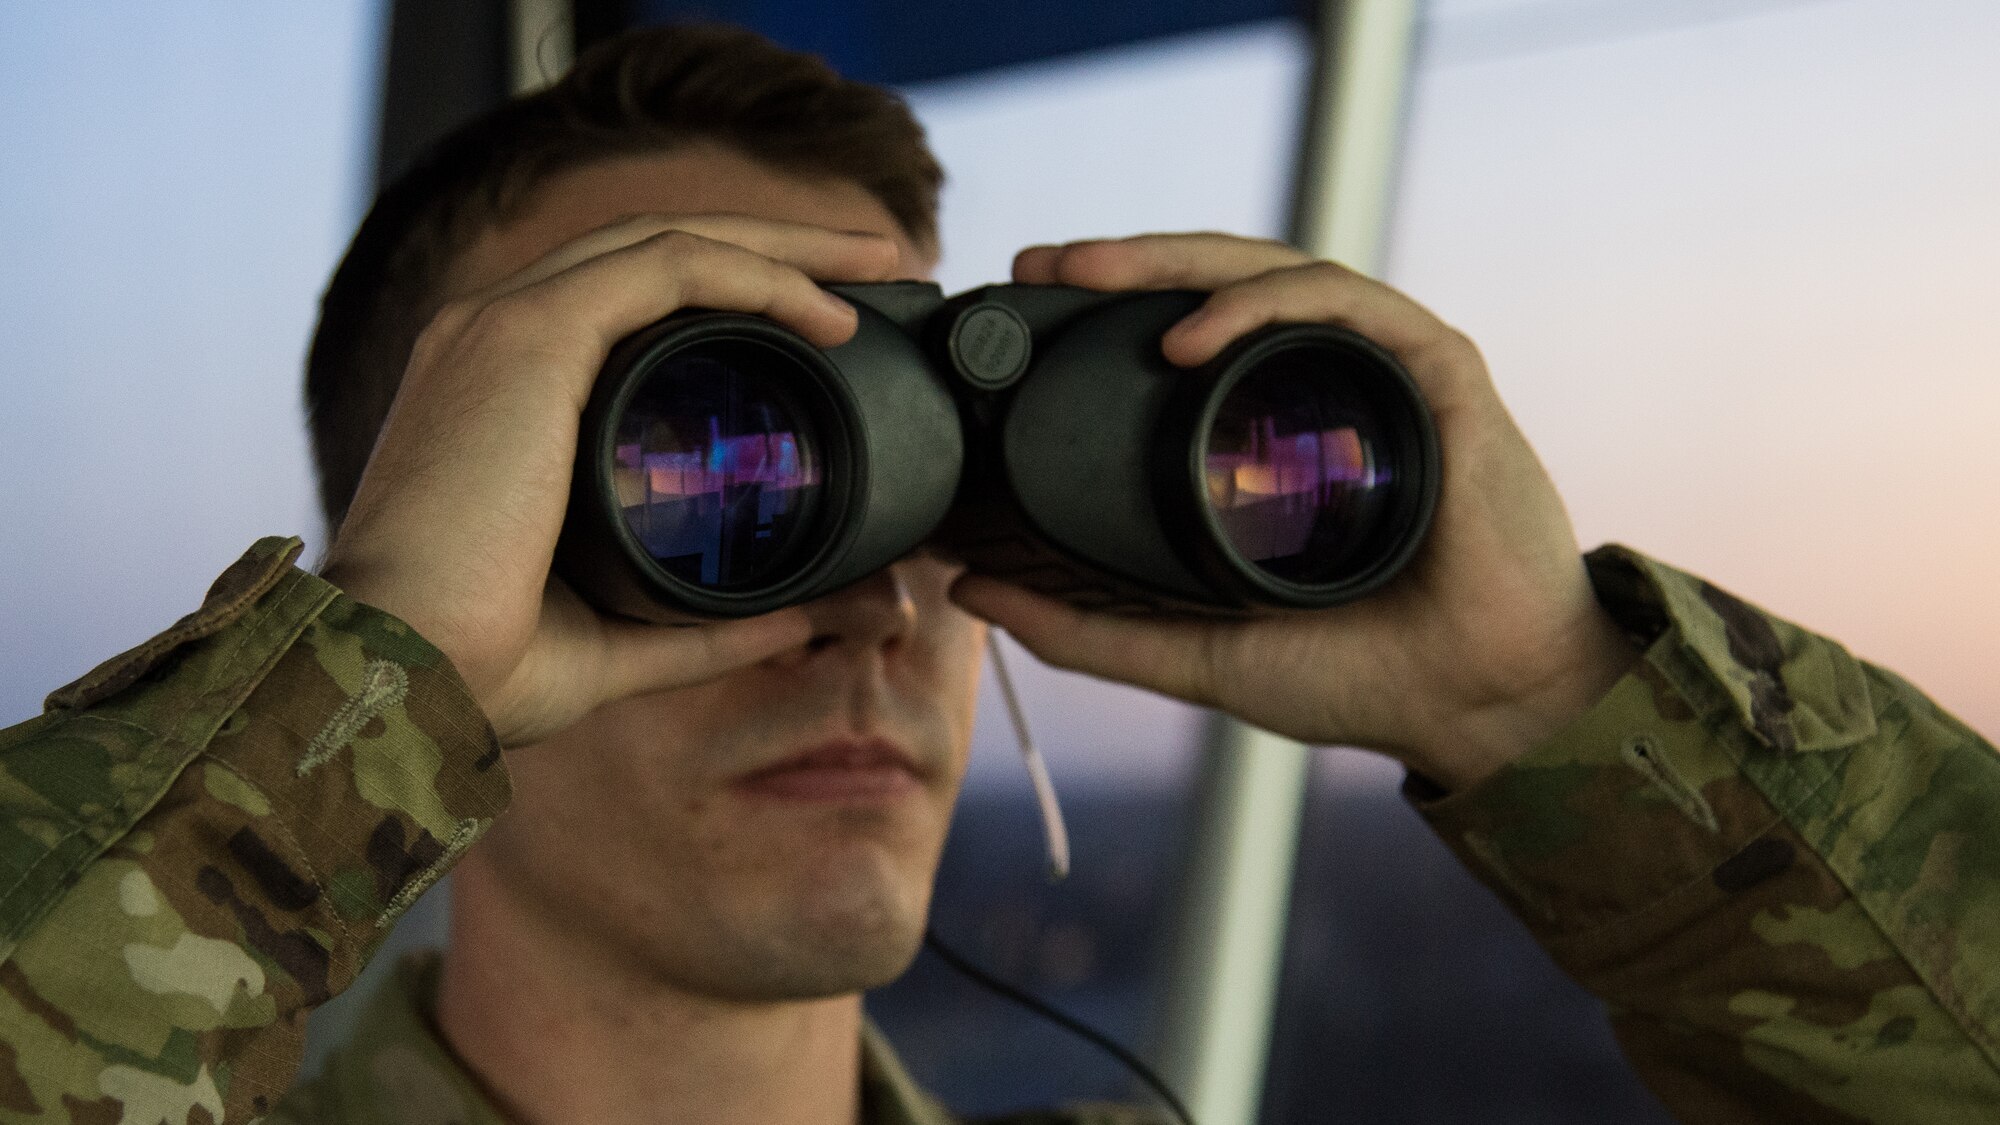 Senior Airman Hunter J. Maggard, 2nd Operations Support Squadron air traffic control apprentice, uses his binoculars to locate an aircraft on the flightline at Barksdale Air Force Base, Louisiana, August 22, 2019.